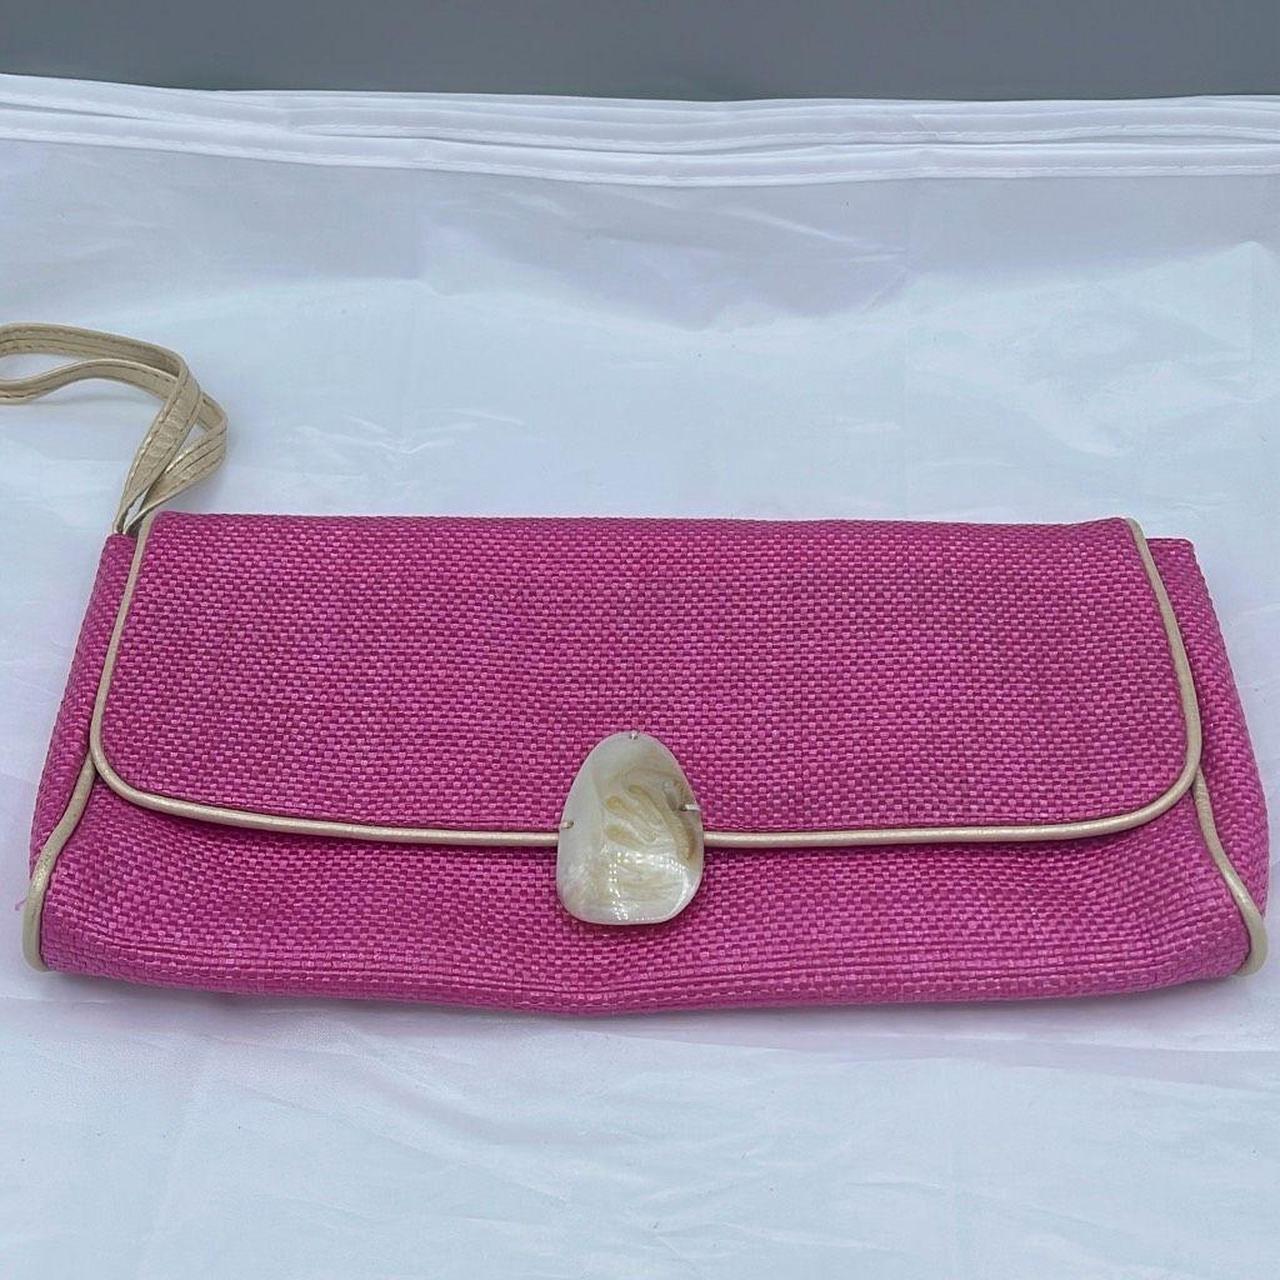 Amazon.com : Avon Pink Suede Purse Travel Mirror : Beauty & Personal Care